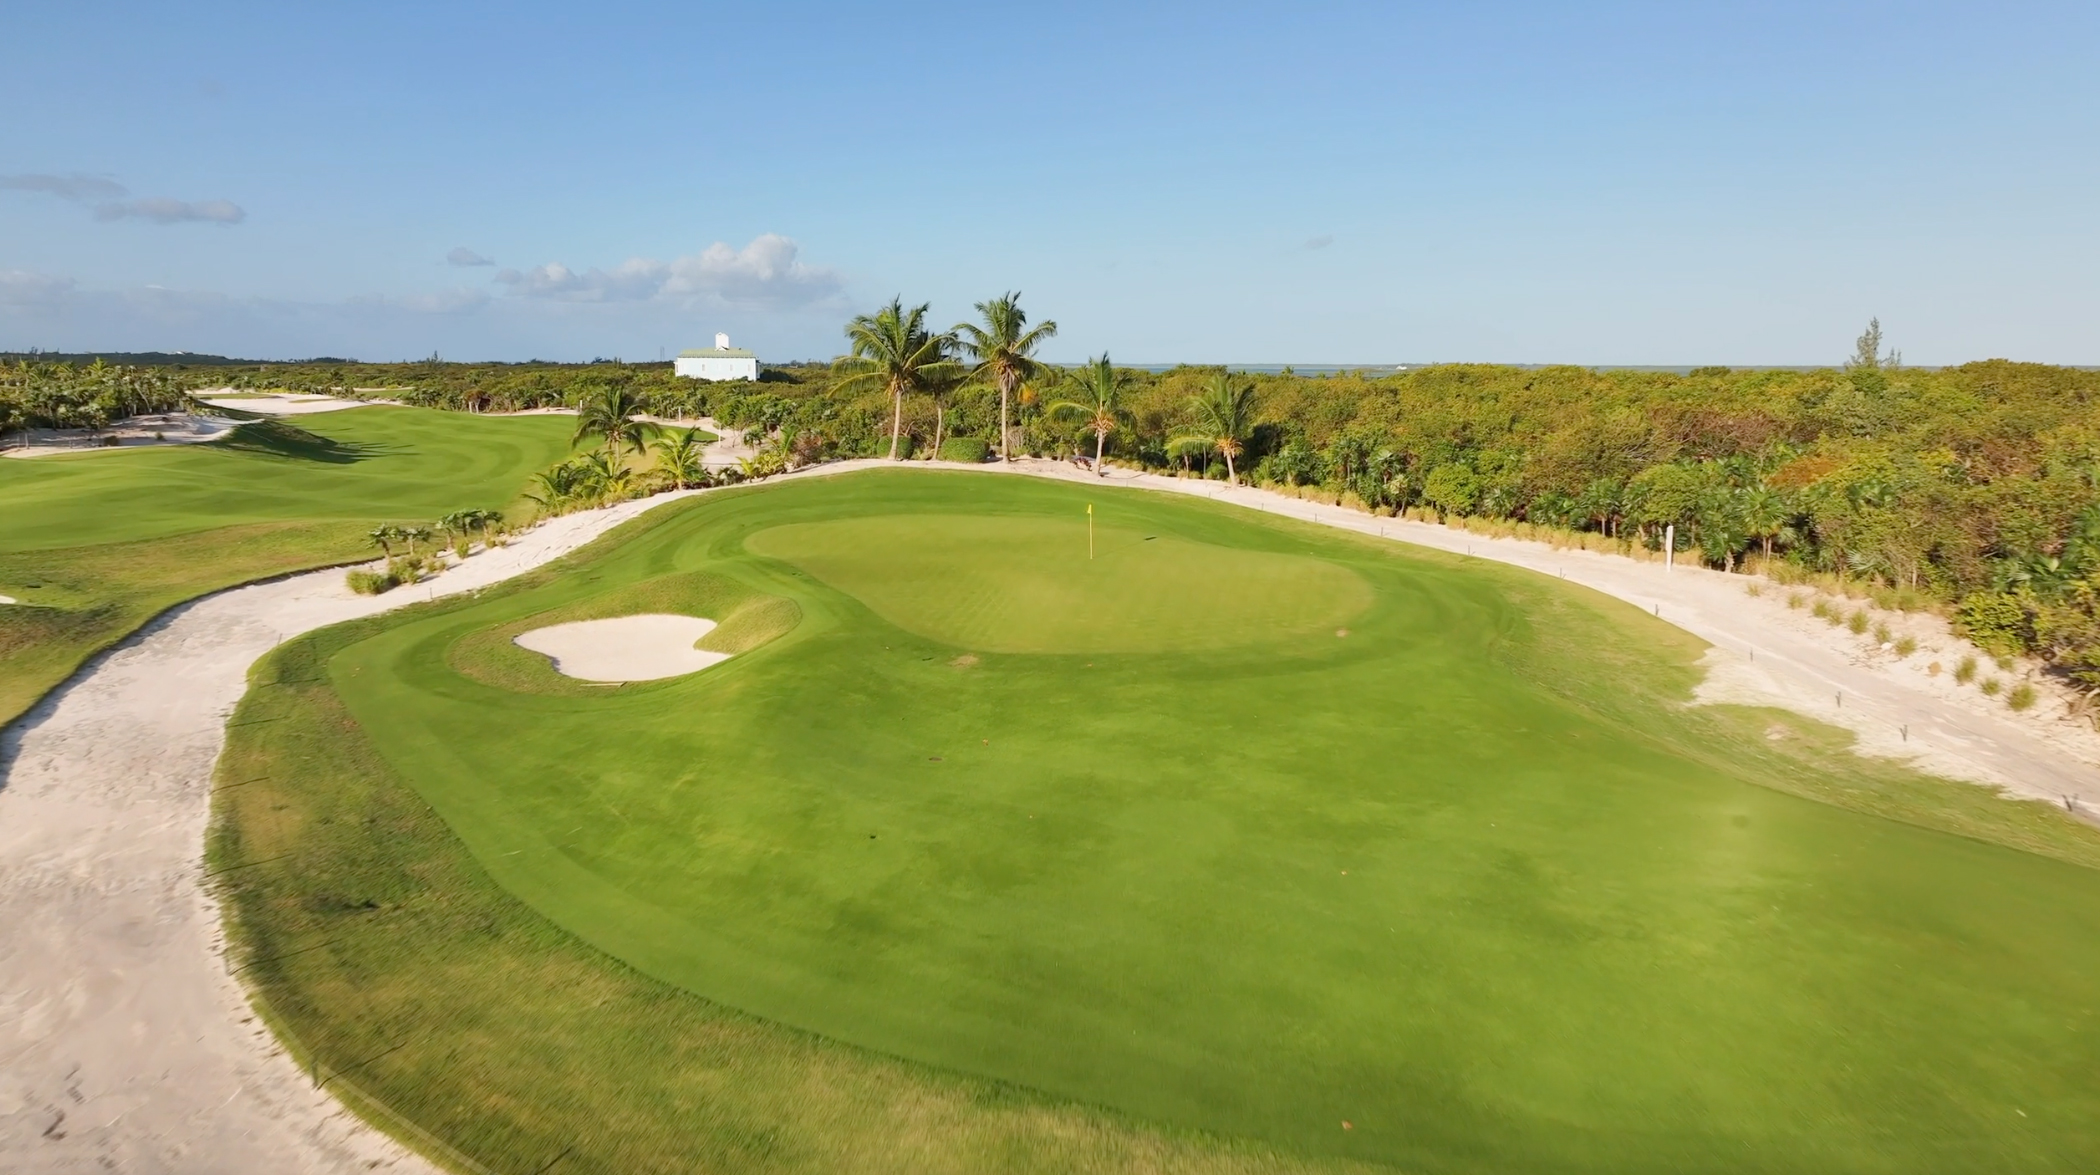 Aerial shot of Hole 10 from The Abaco Club golf course